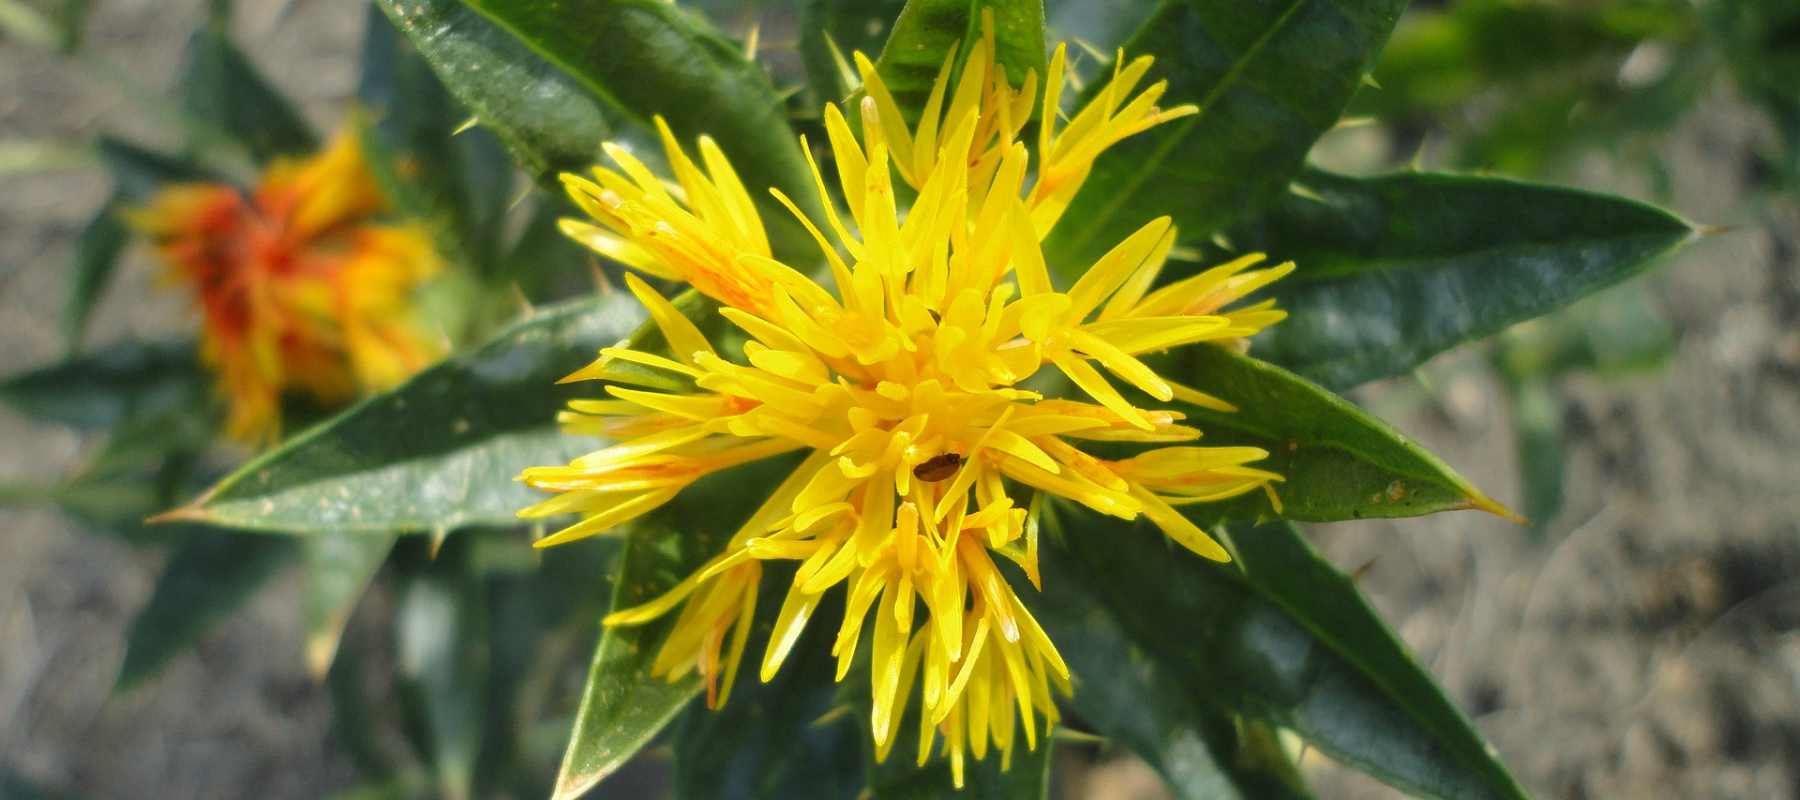 Safflower Oil: Is It Good For Your Cooking & Beauty Routine